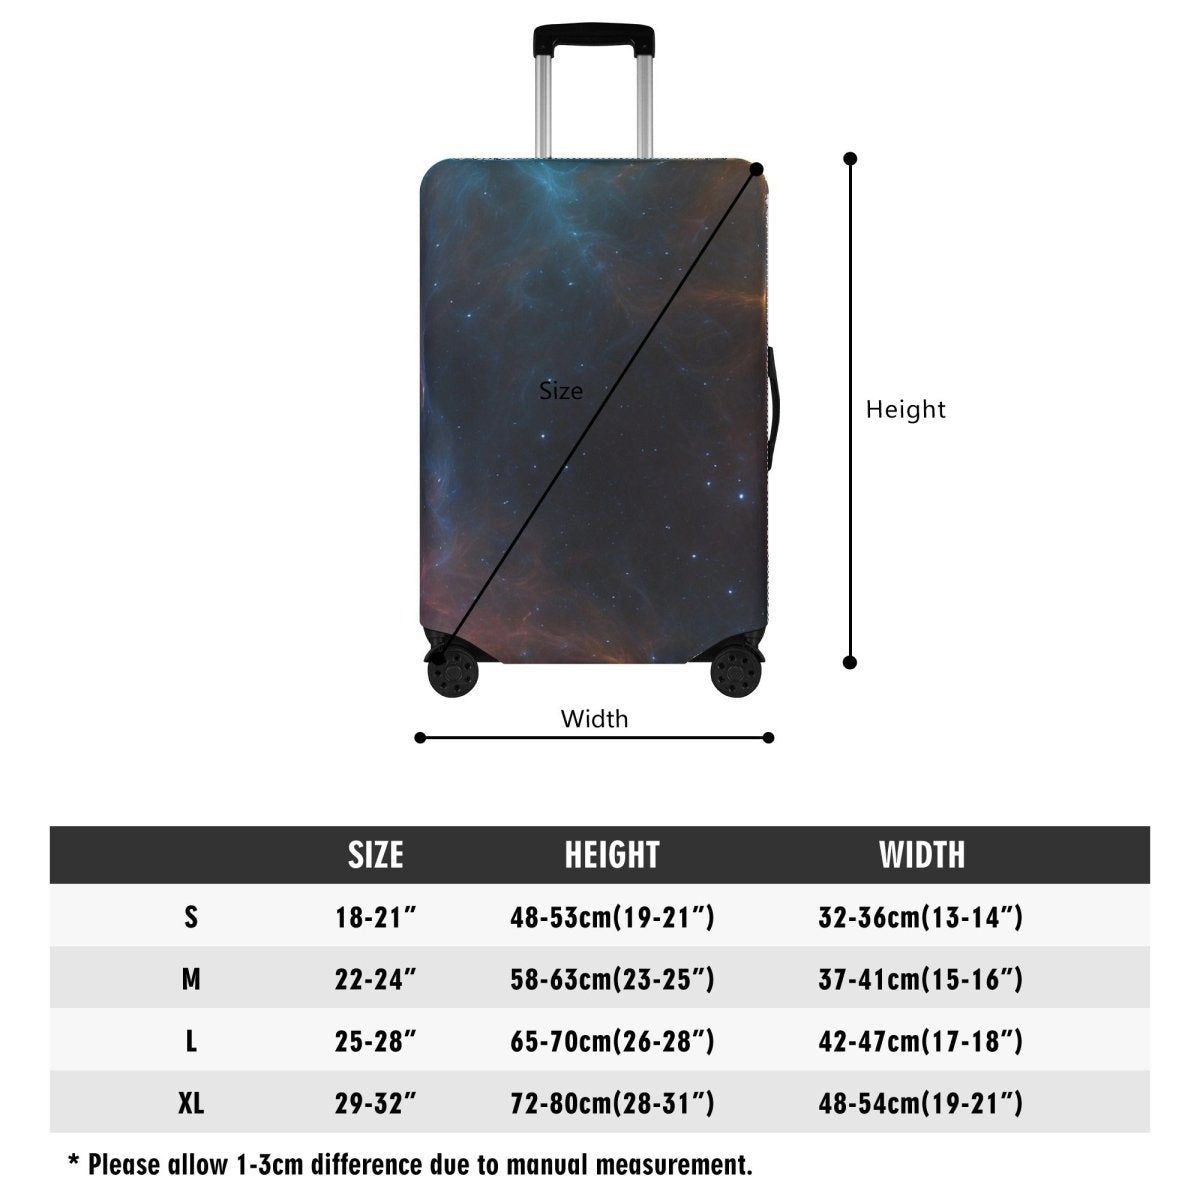 Starry Night Luggage Cover - Protect Your Suitcase in Style - Iron Phoenix GHG